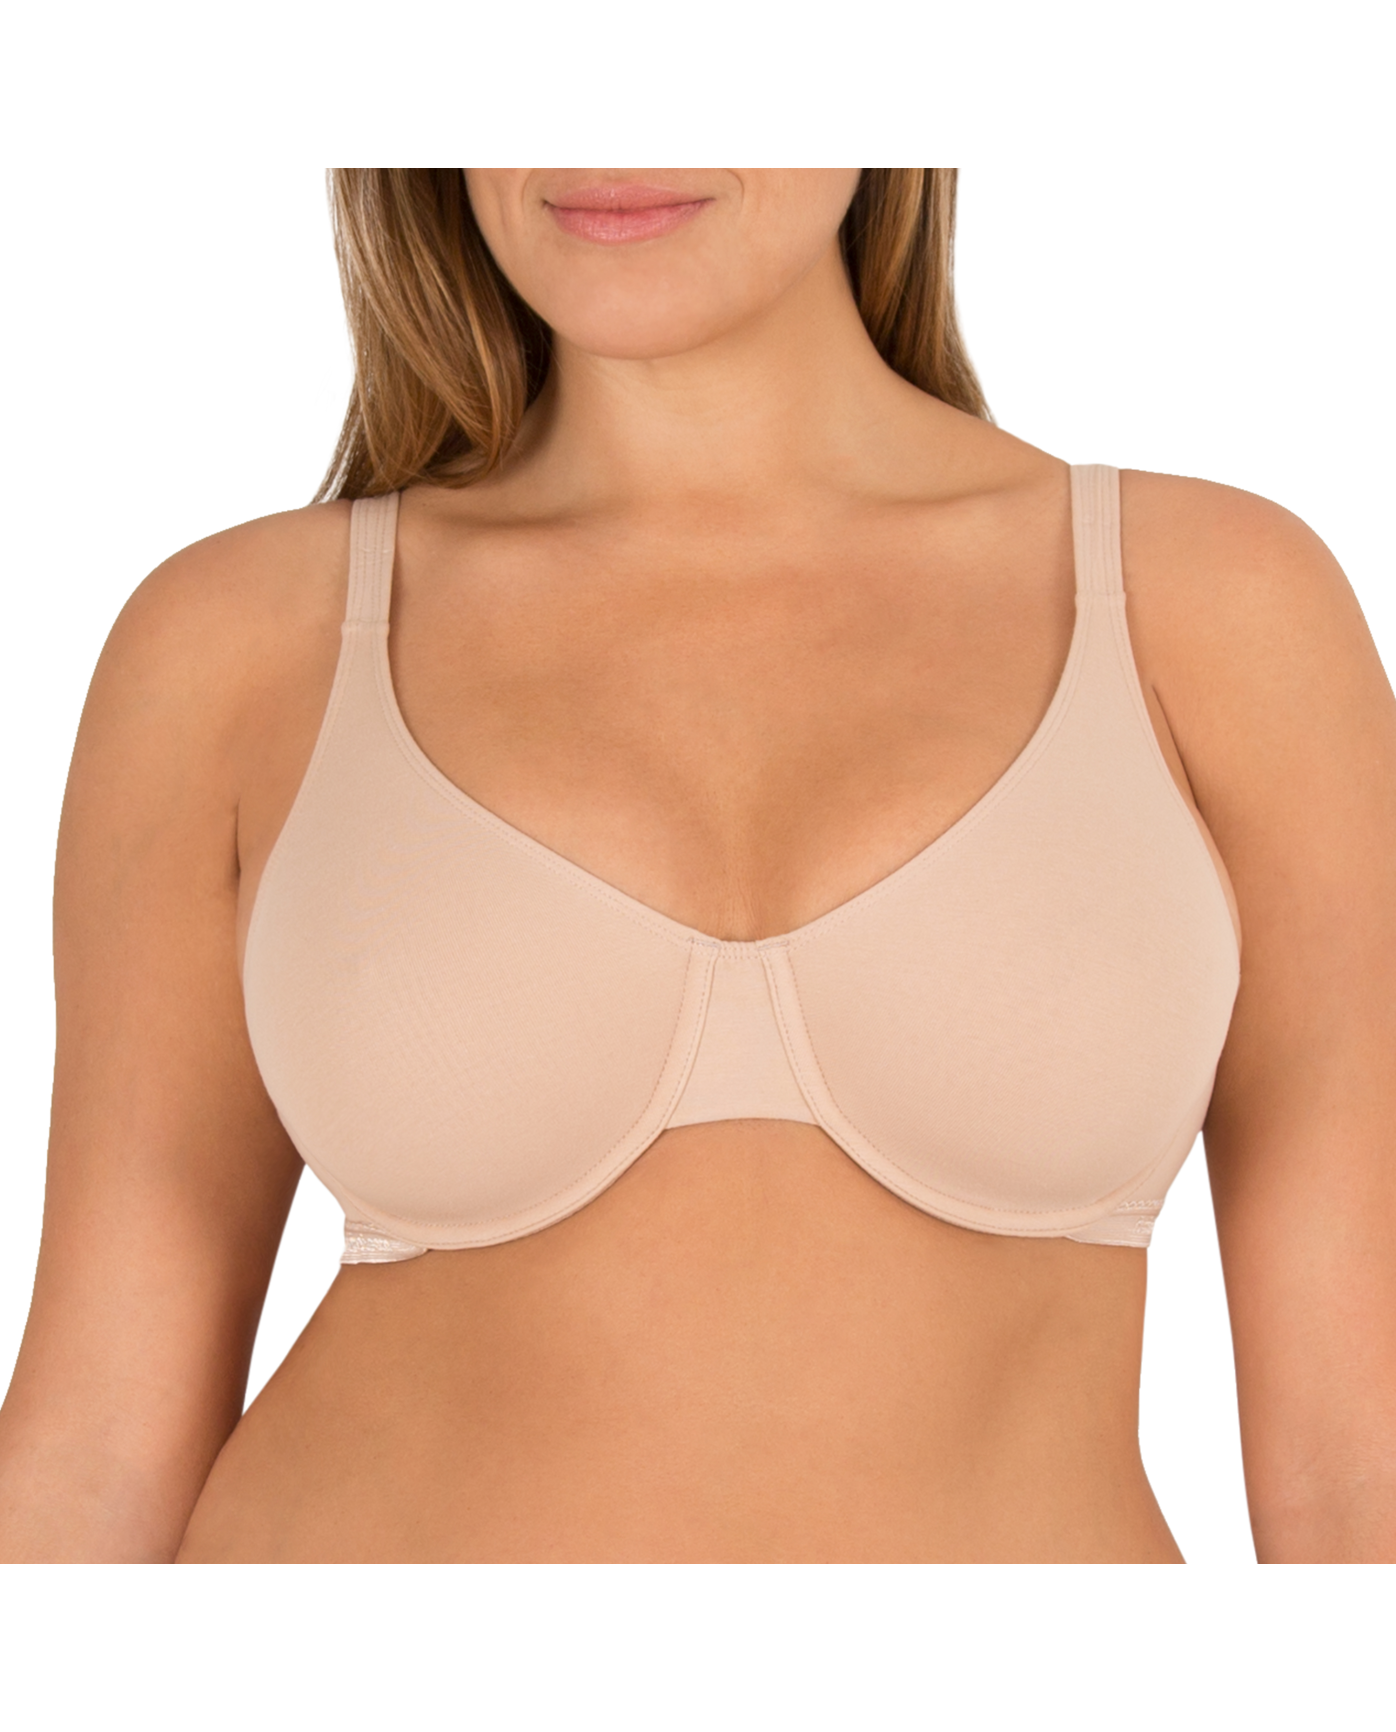 New Fruit of the Loom Womens Unlined Underwire Bra, White, Sz 34D! You –  The Warehouse Liquidation